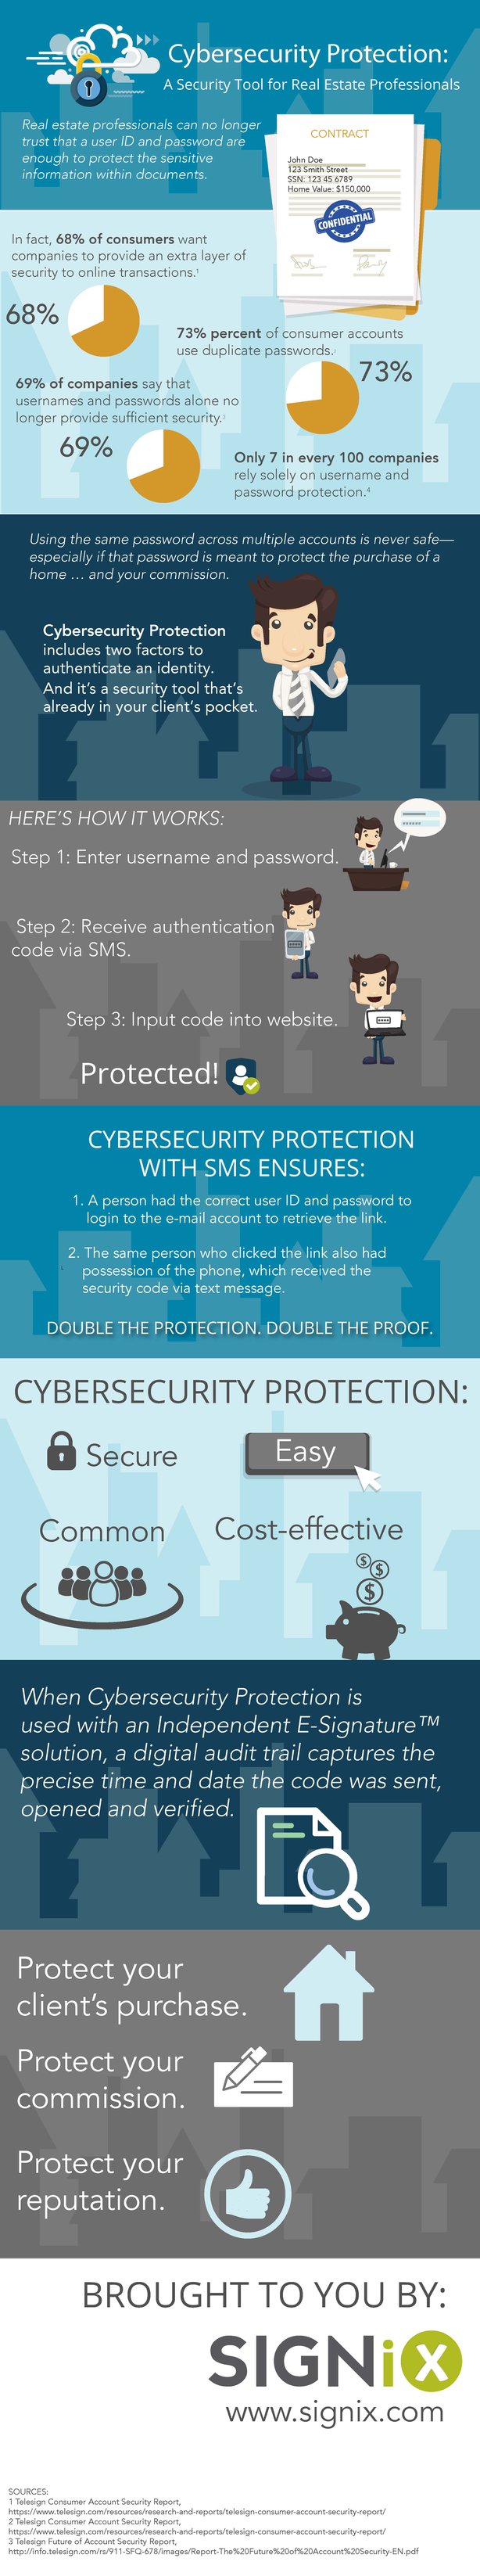 Cybersecurity Protection for Real Estate-2.jpg